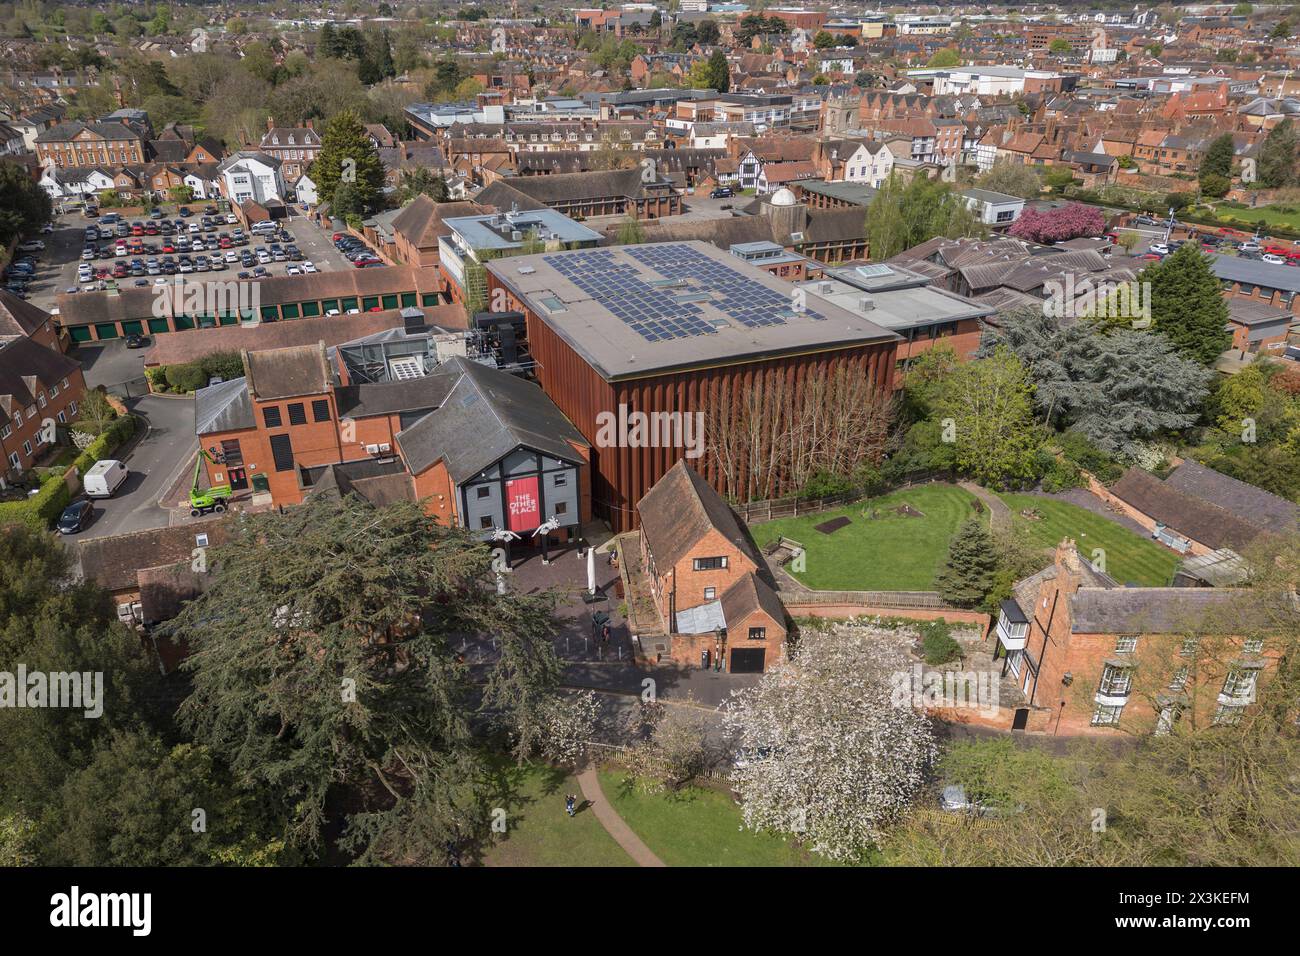 Aerial view of The Other Place theatre in Stratford Upon Avon, UK. Stock Photo